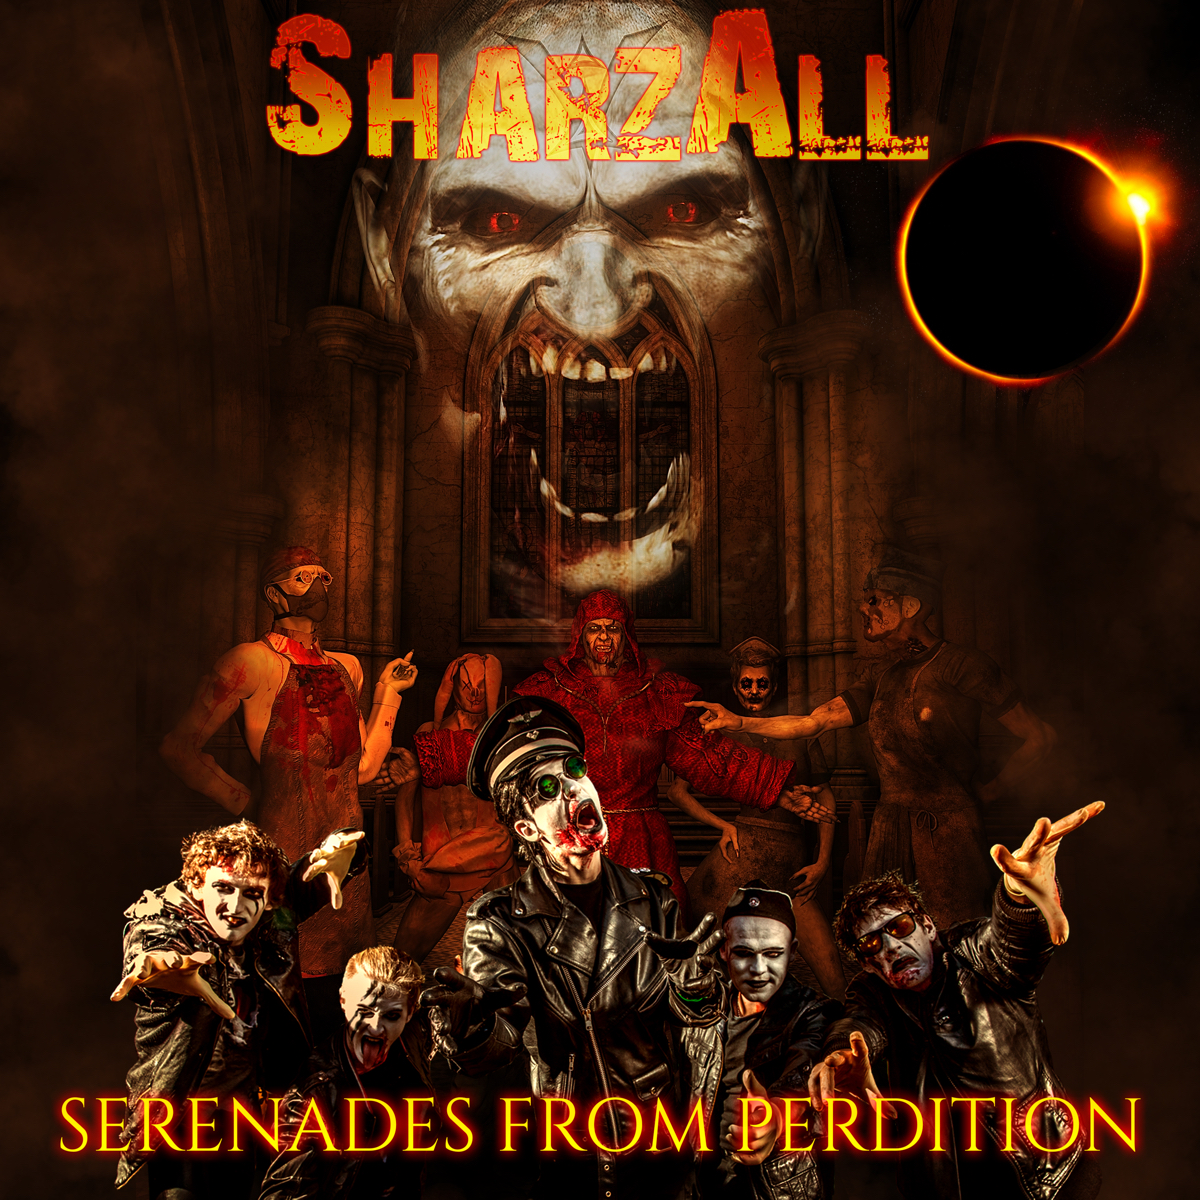 Sharzall (Svk) – Serenades From Perdition -EP